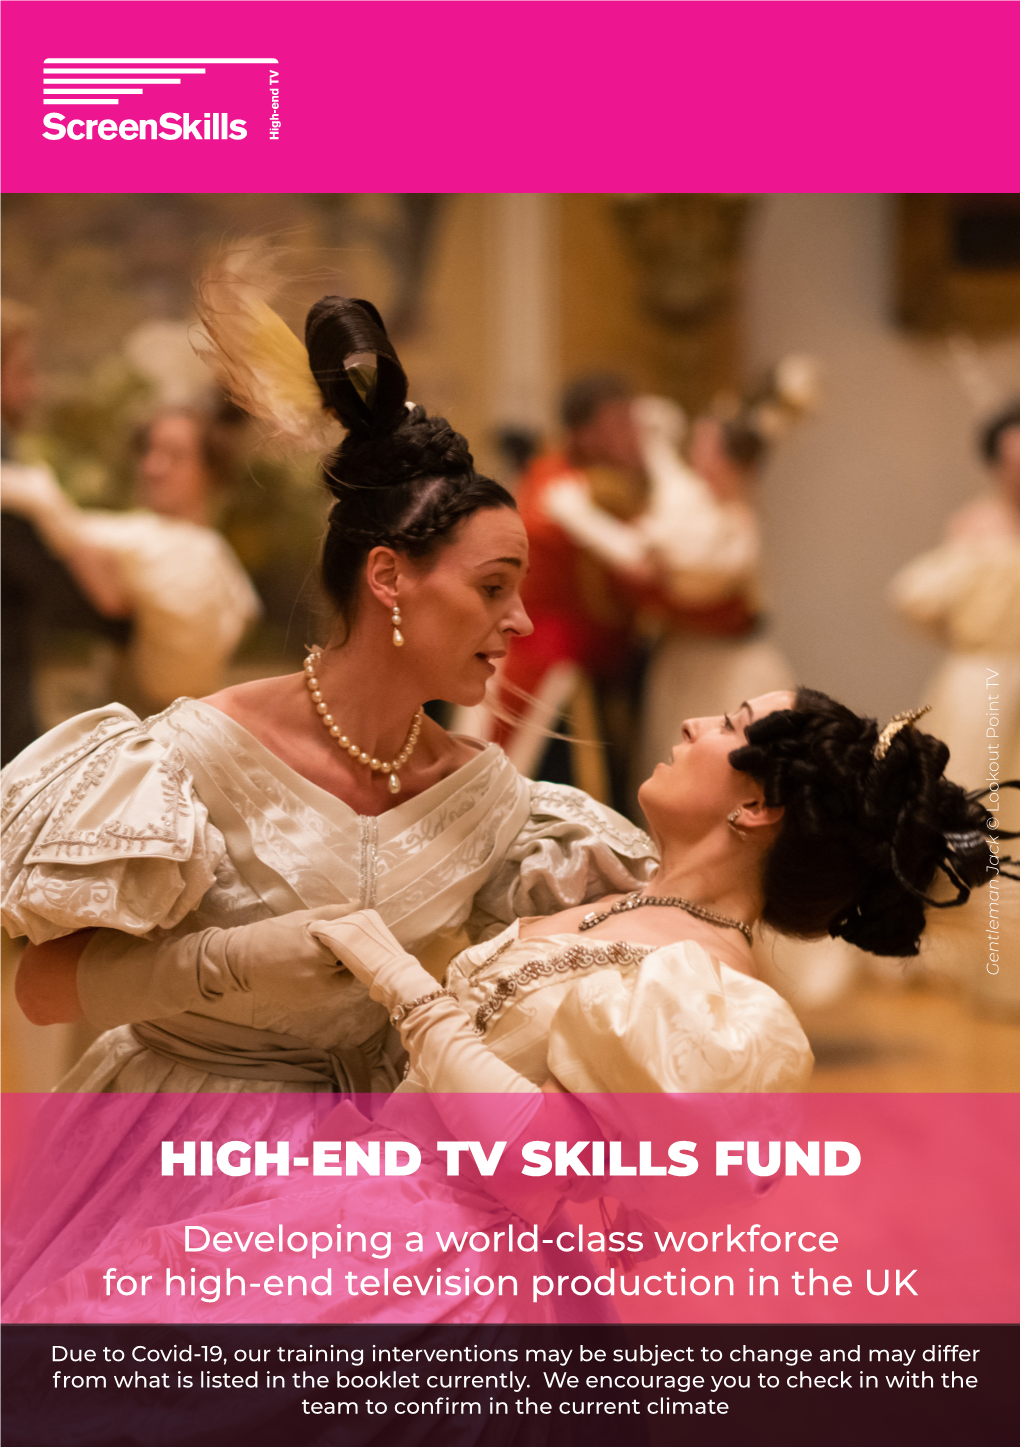 HIGH-END TV SKILLS FUND Developing a World-Class Workforce for High-End Television Production in the UK